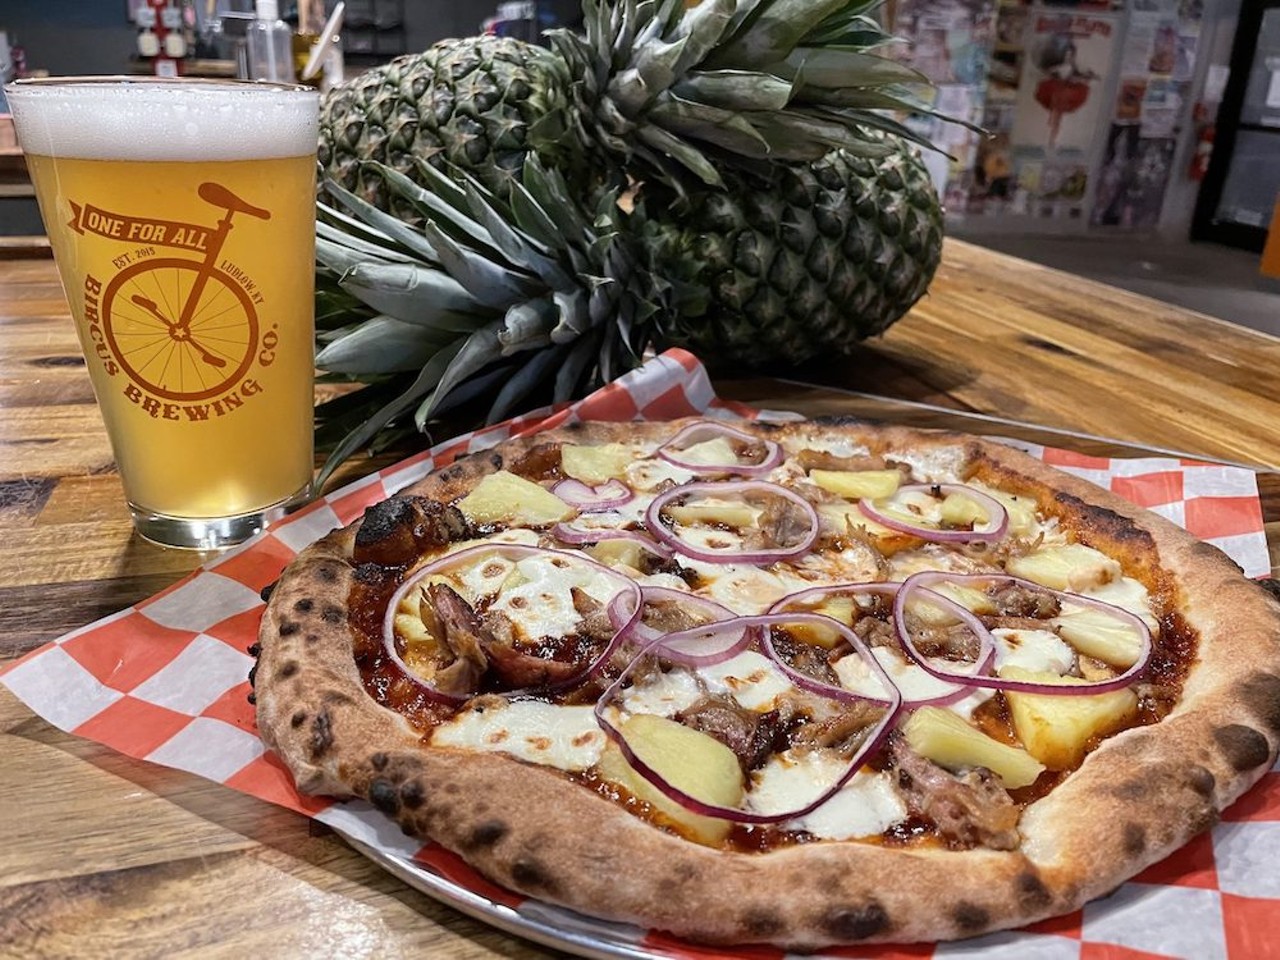 Bircus Brewing Co. & Pizzeria
322 Elm St., Ludlow
Dada Smokes BBQ Pork & Pineapple: A 12-inch pizza featuring Dada Smokes smoked pulled pork, Dada Smokes BBQ sauce, fresh pineapple, smoked mozzarella and red onion. Available at the Ludlow location only.